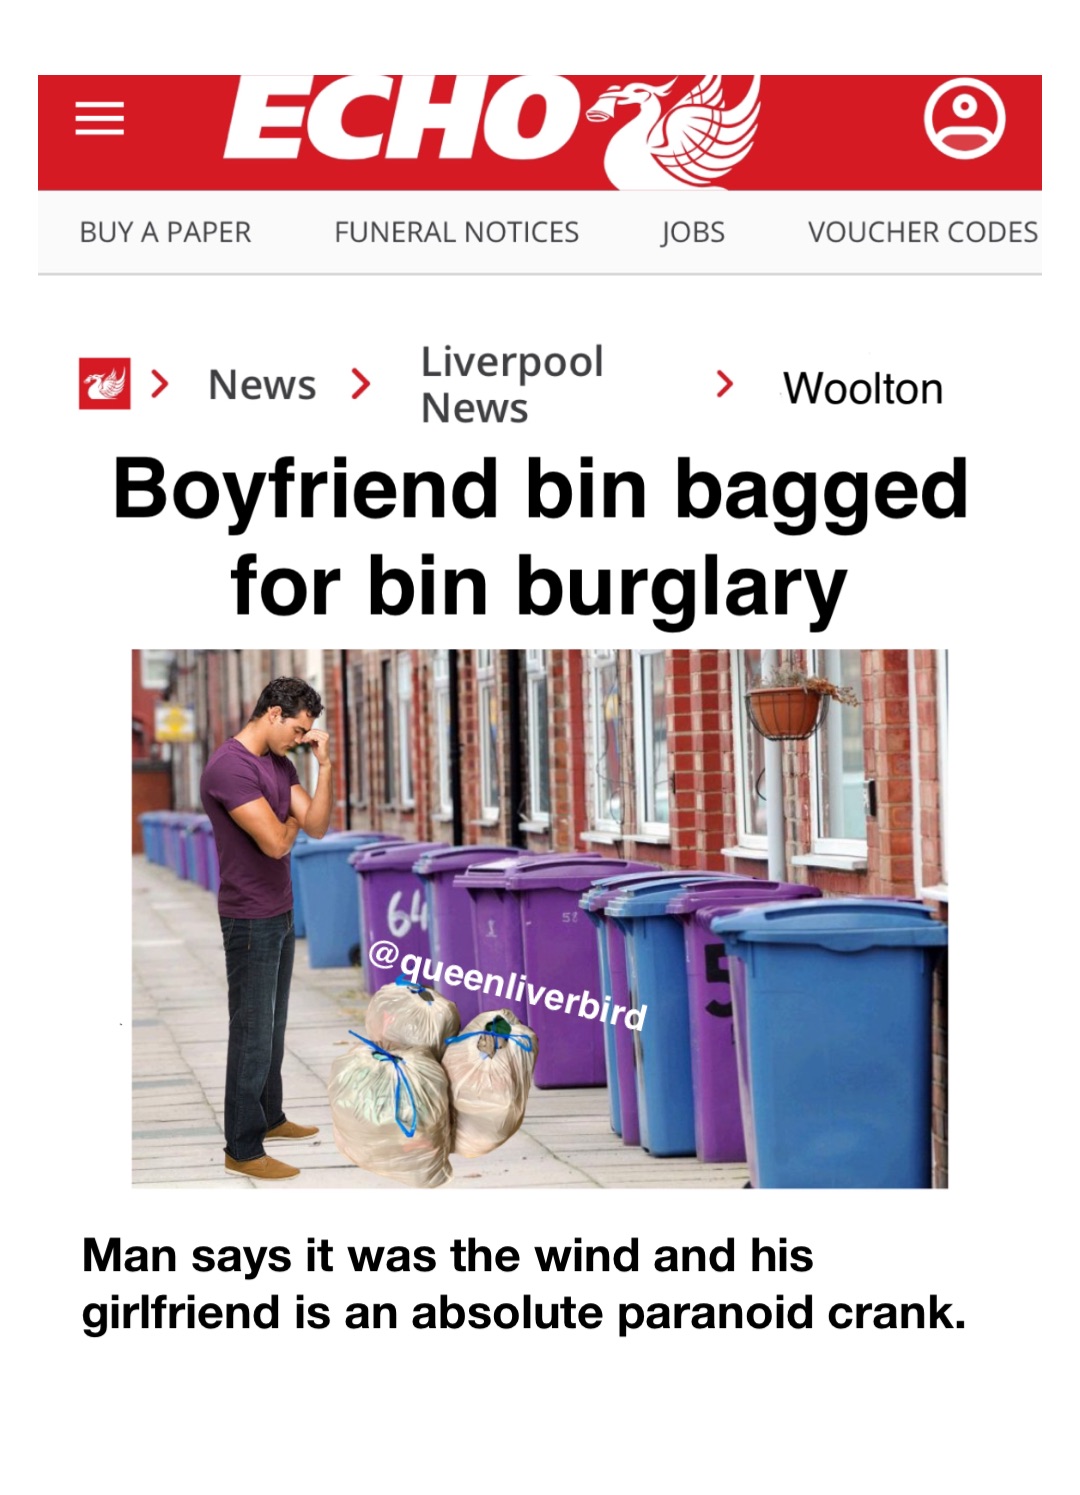 Man says it was the wind and his girlfriend is an absolute paranoid crank. @queenliverbird